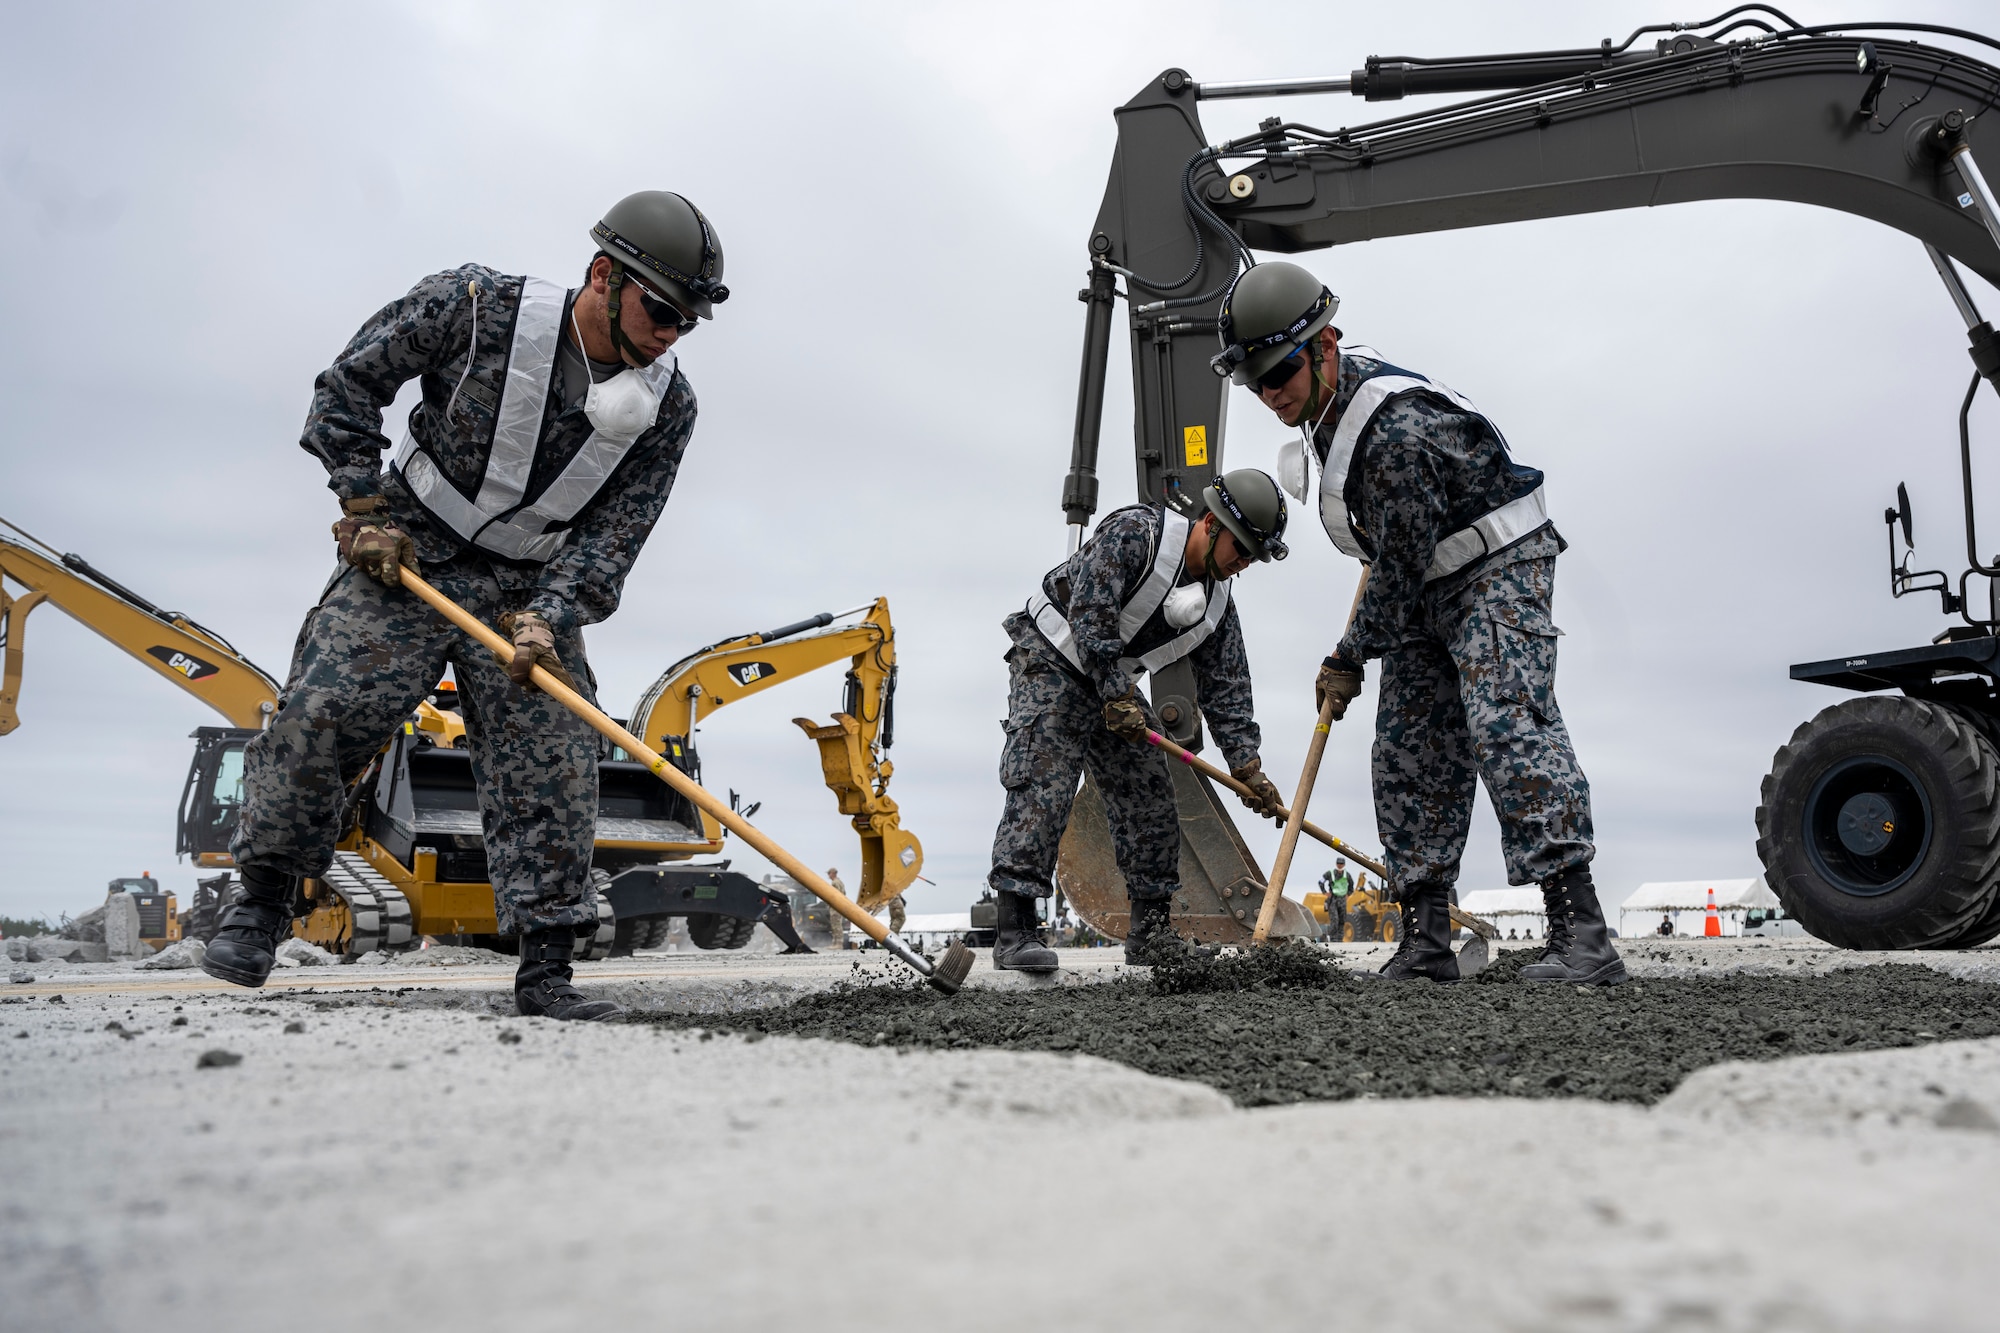 Japan Air Self-Defense Force Airmen fill a crater during a bilateral live fire exercise.